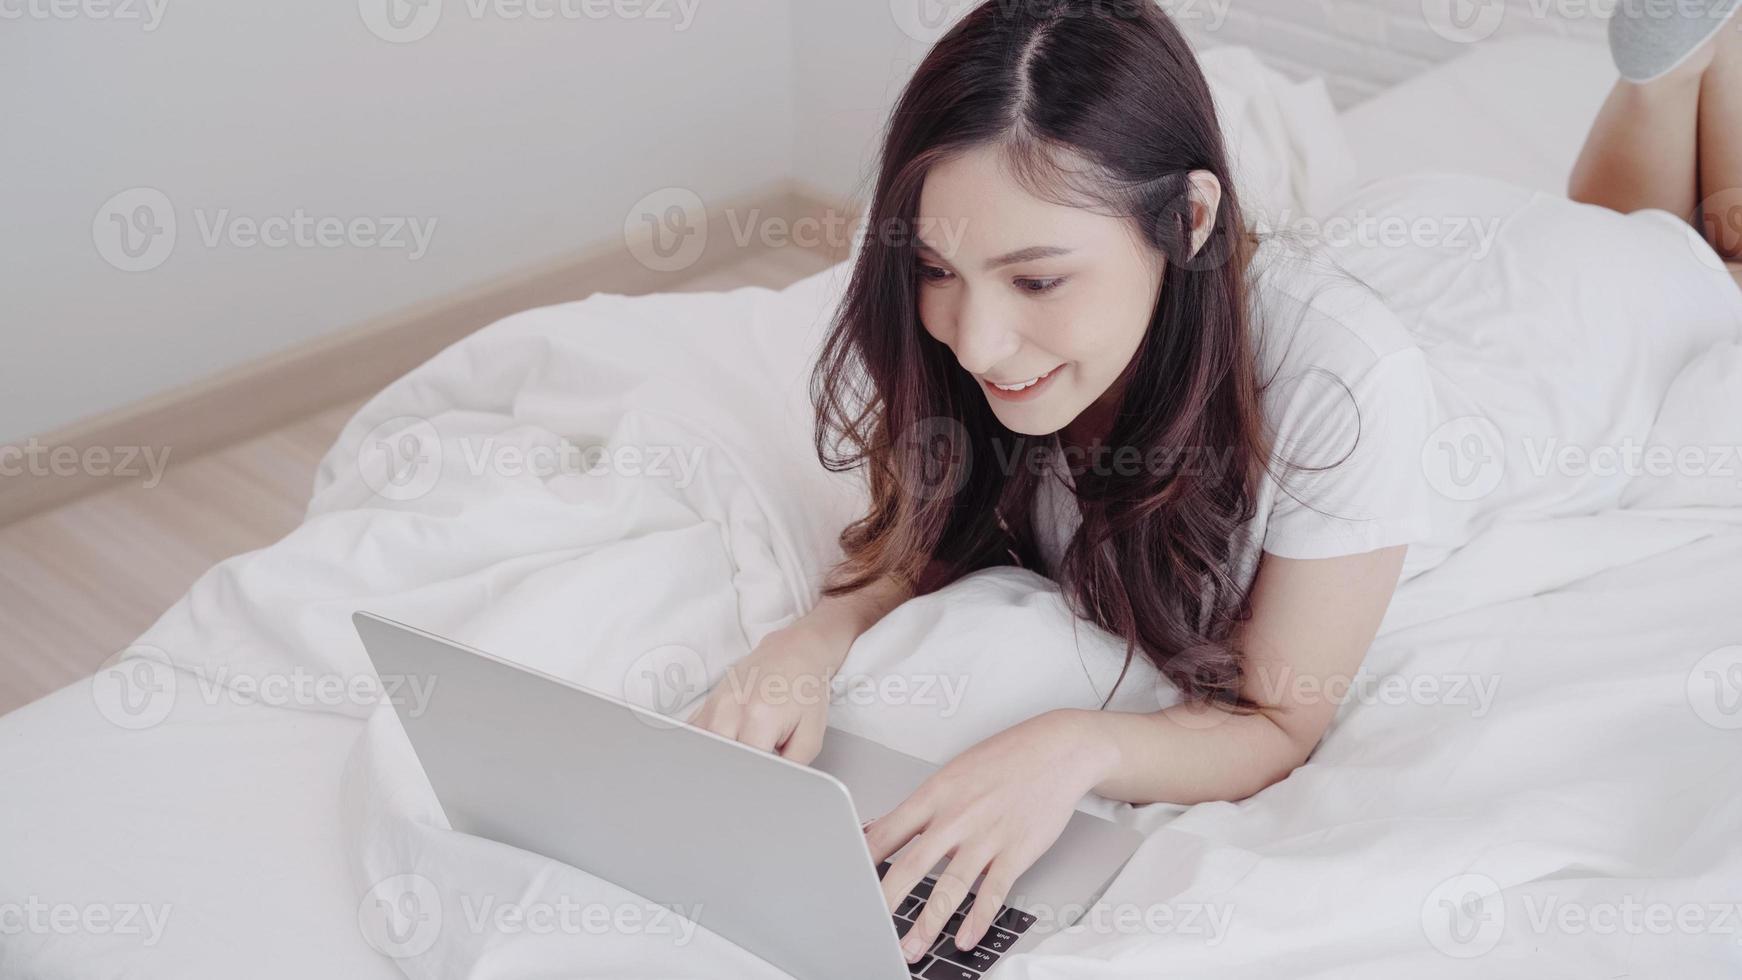 Portrait of beautiful attractive Asian woman using computer or laptop and listening music while lying on the bed when relax in her bedroom at home. Lifestyle women using relax time at home concept. photo